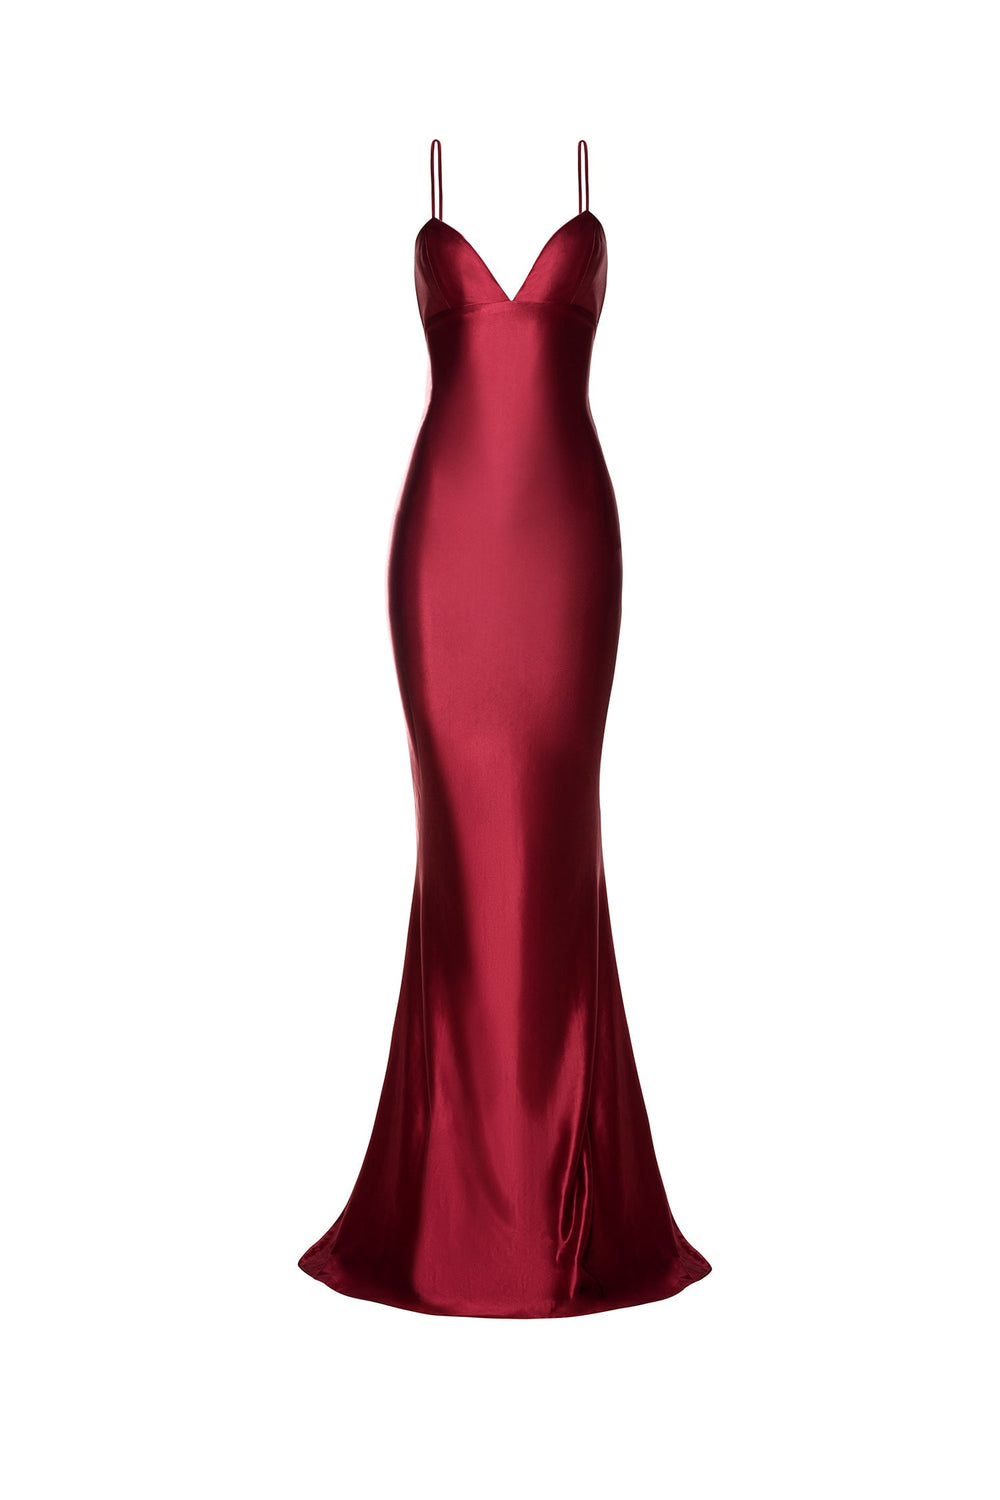 Maisie - Burgundy Satin Gown with Lace-Up Back